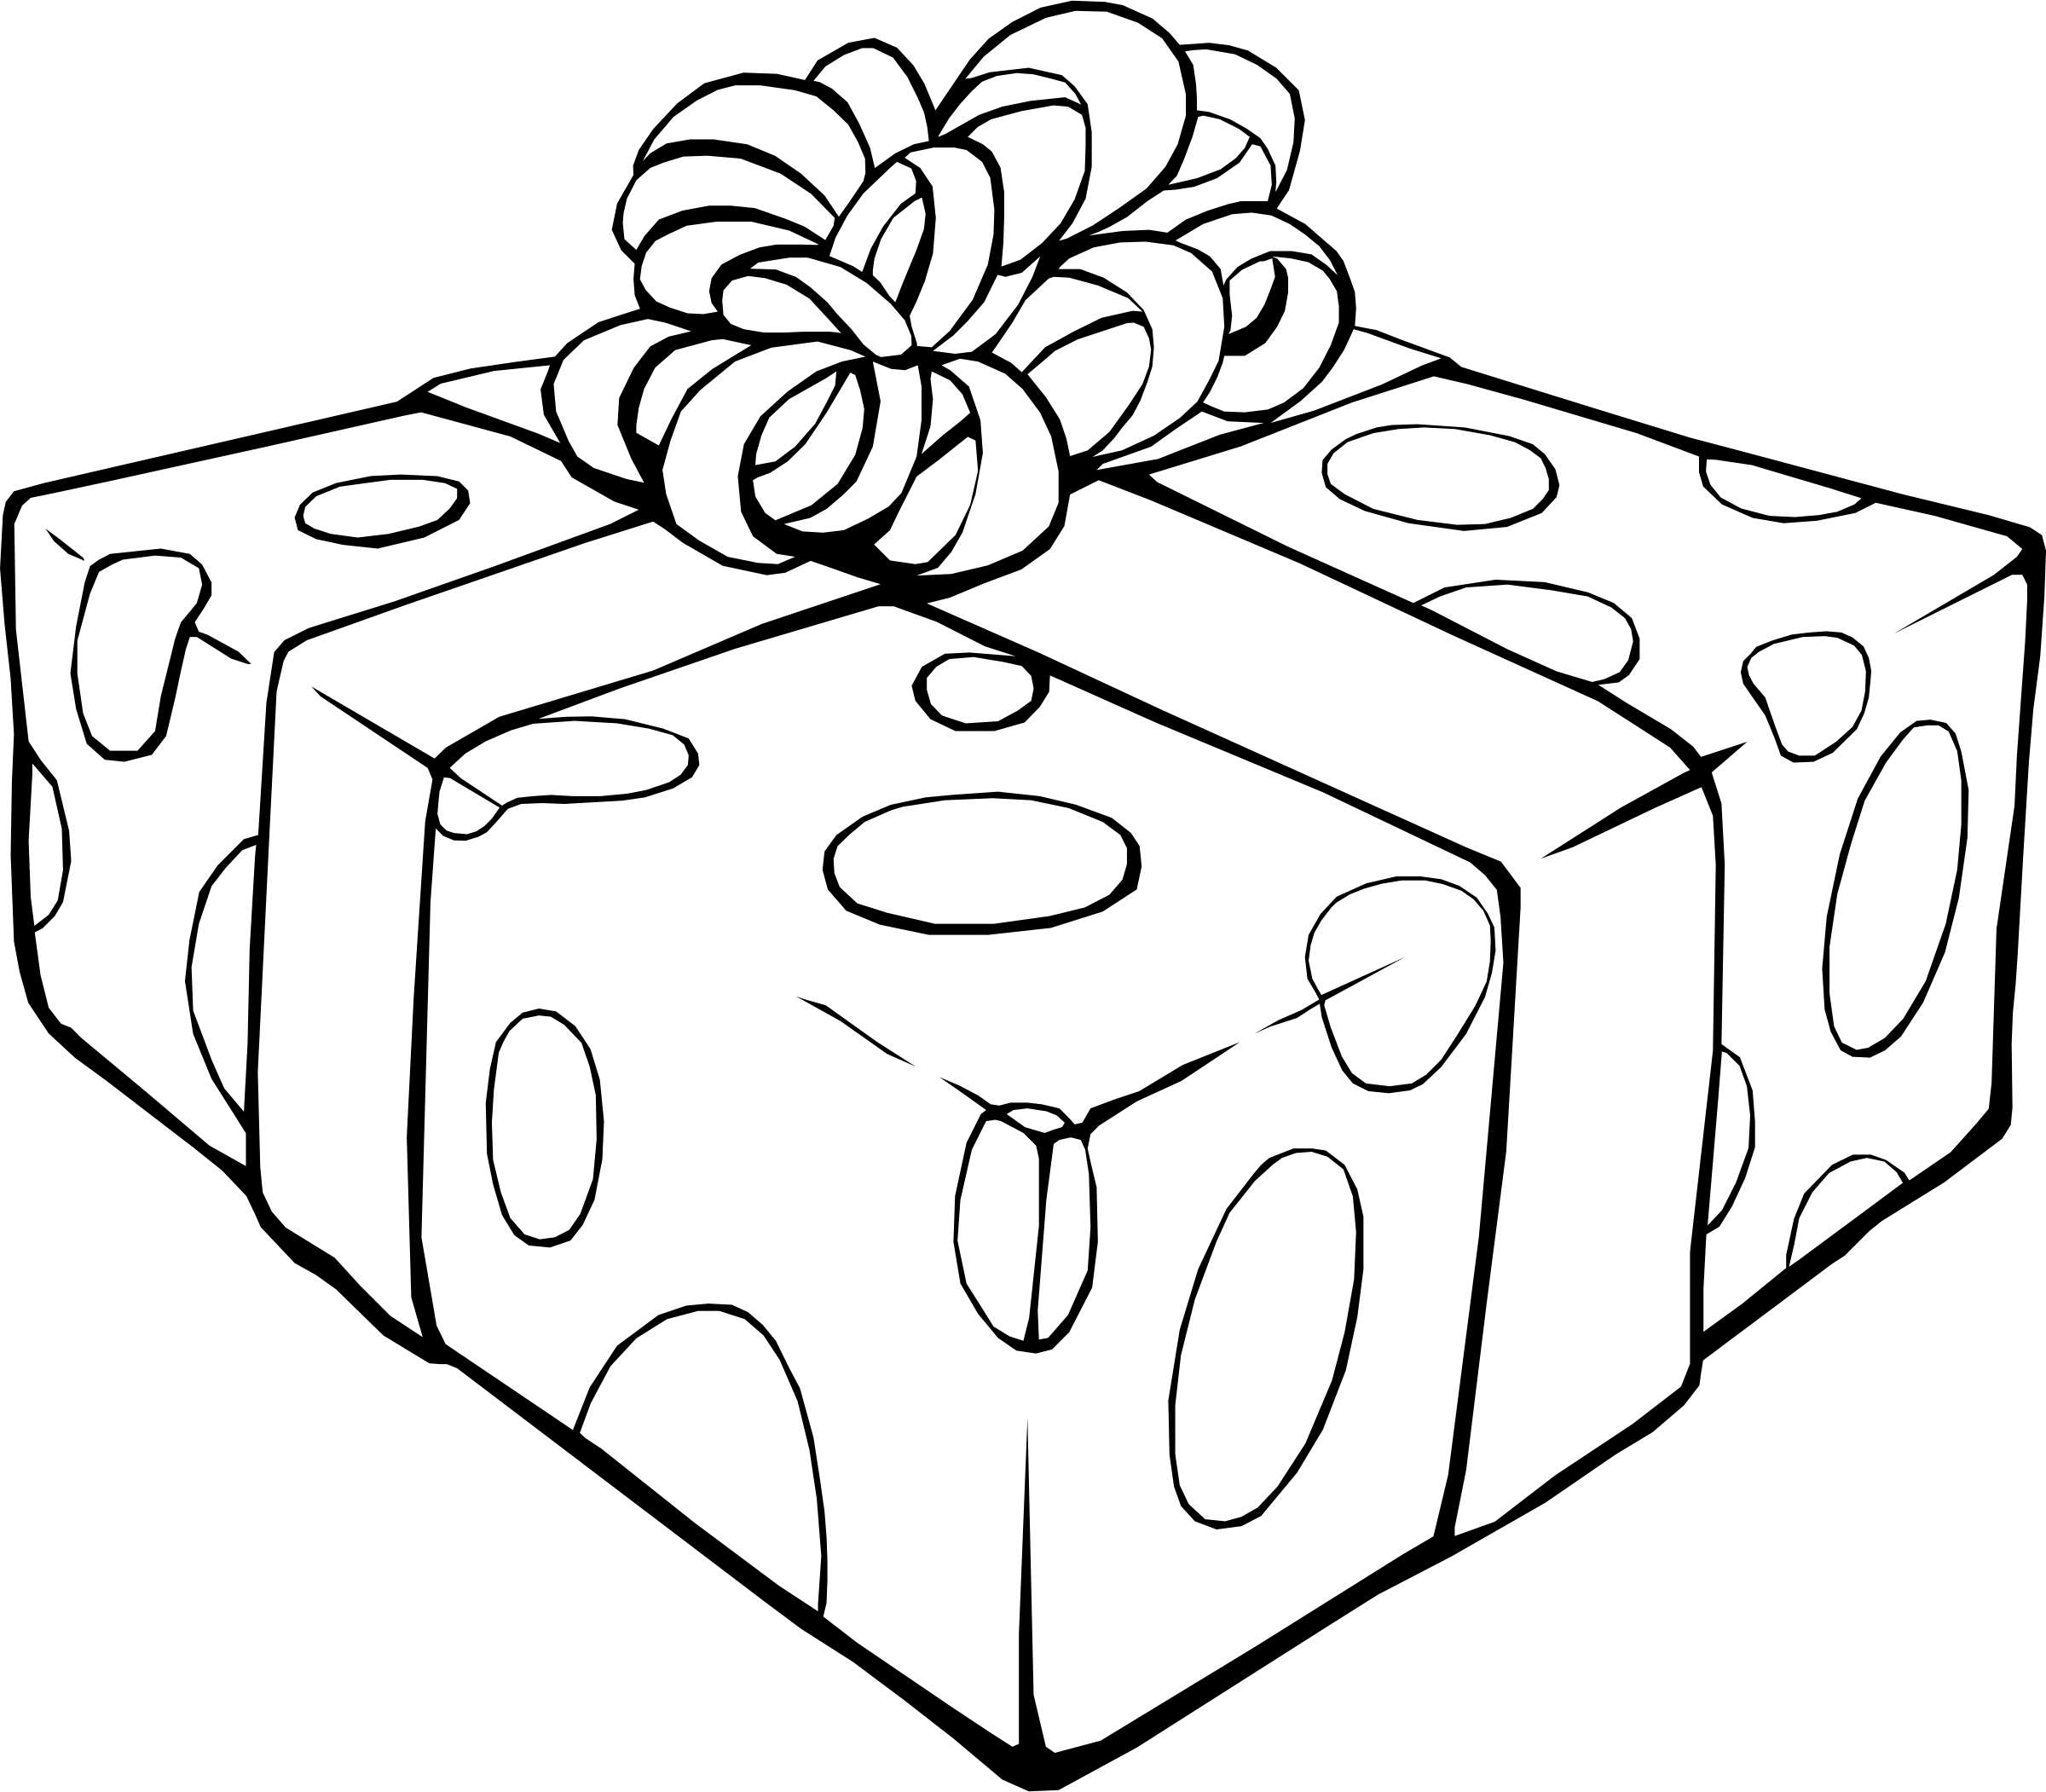 White clipart present. Birthday drawing at getdrawings